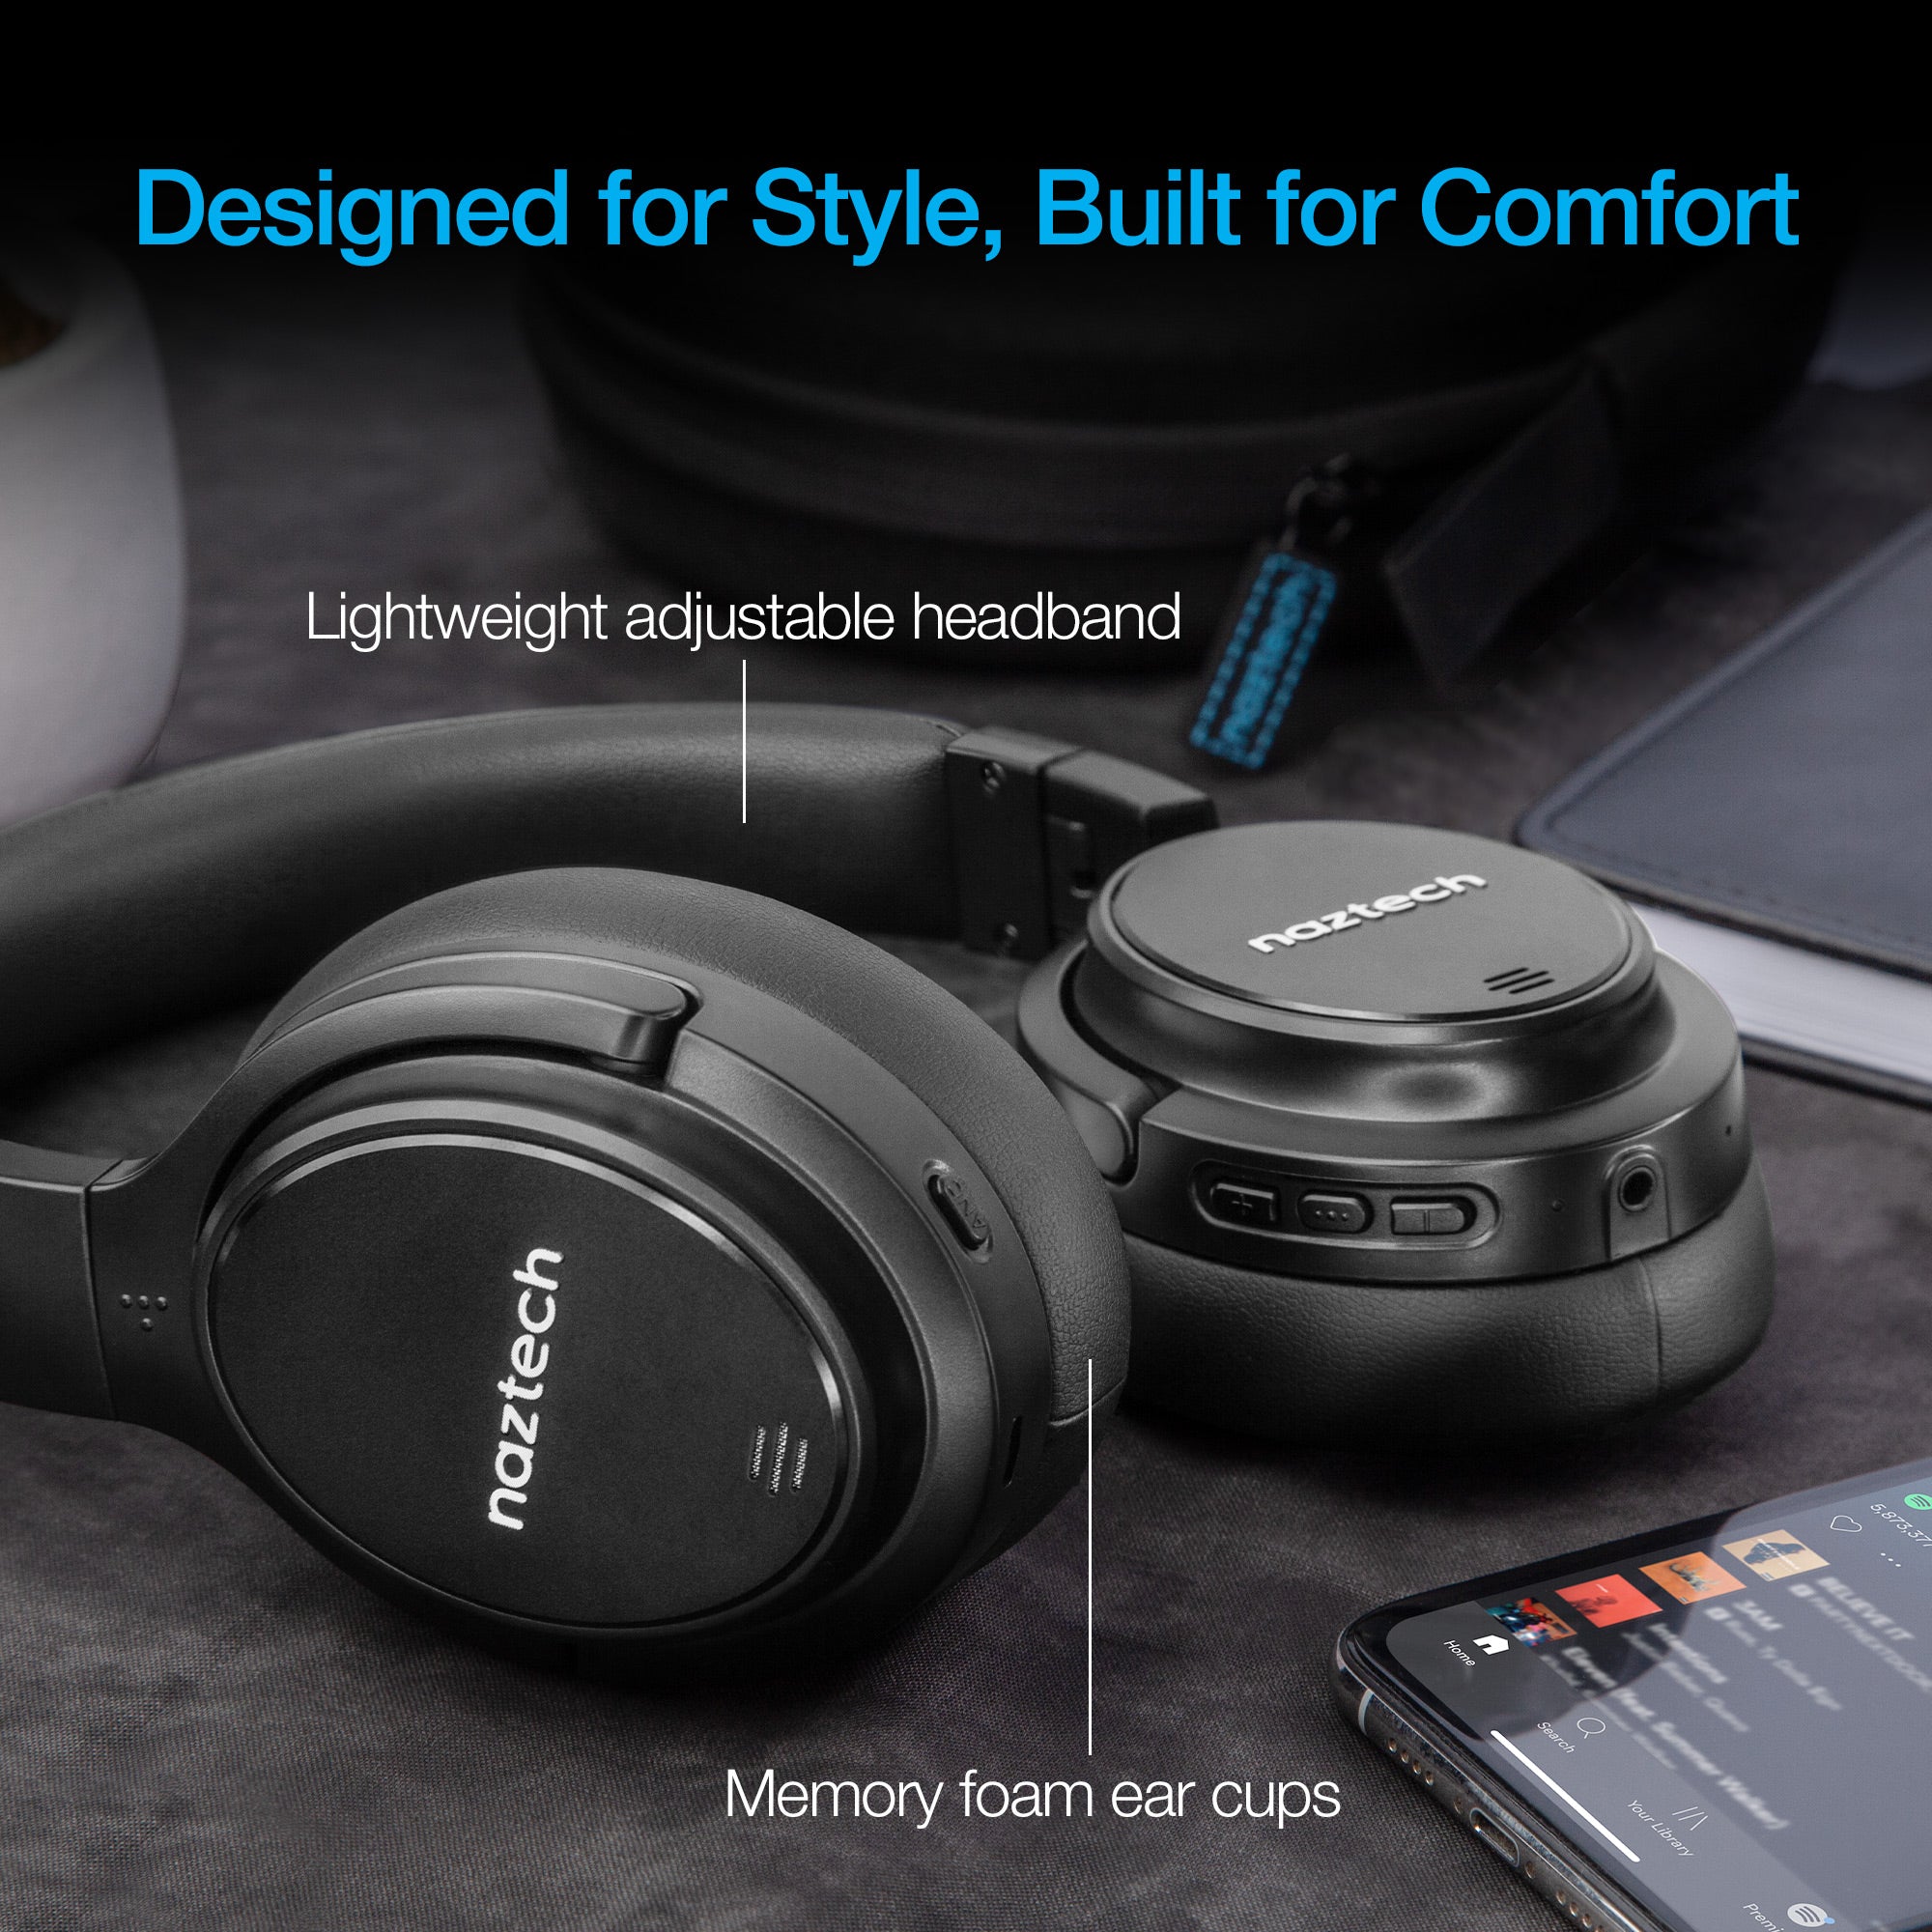 Wireless Headphones - ANC Noise-Cancelling